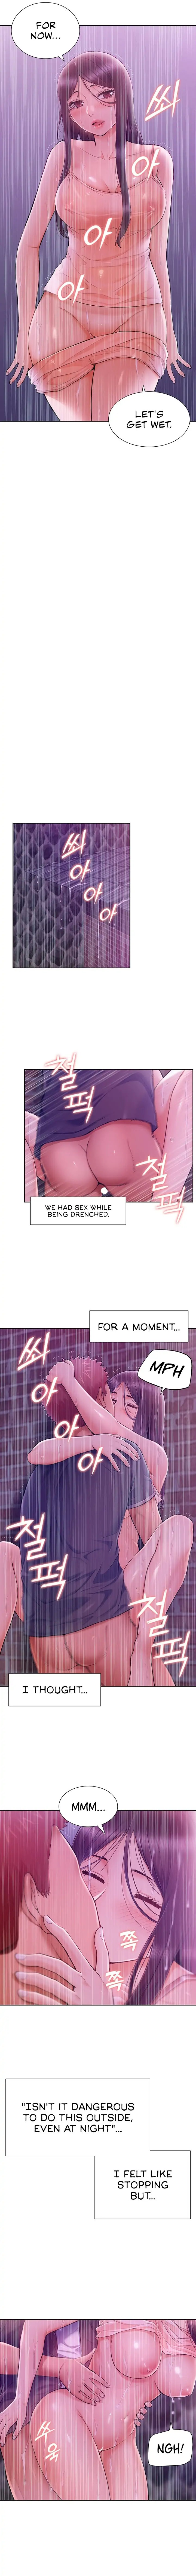 The Memories of that Summer Day - Chapter 27 Page 4